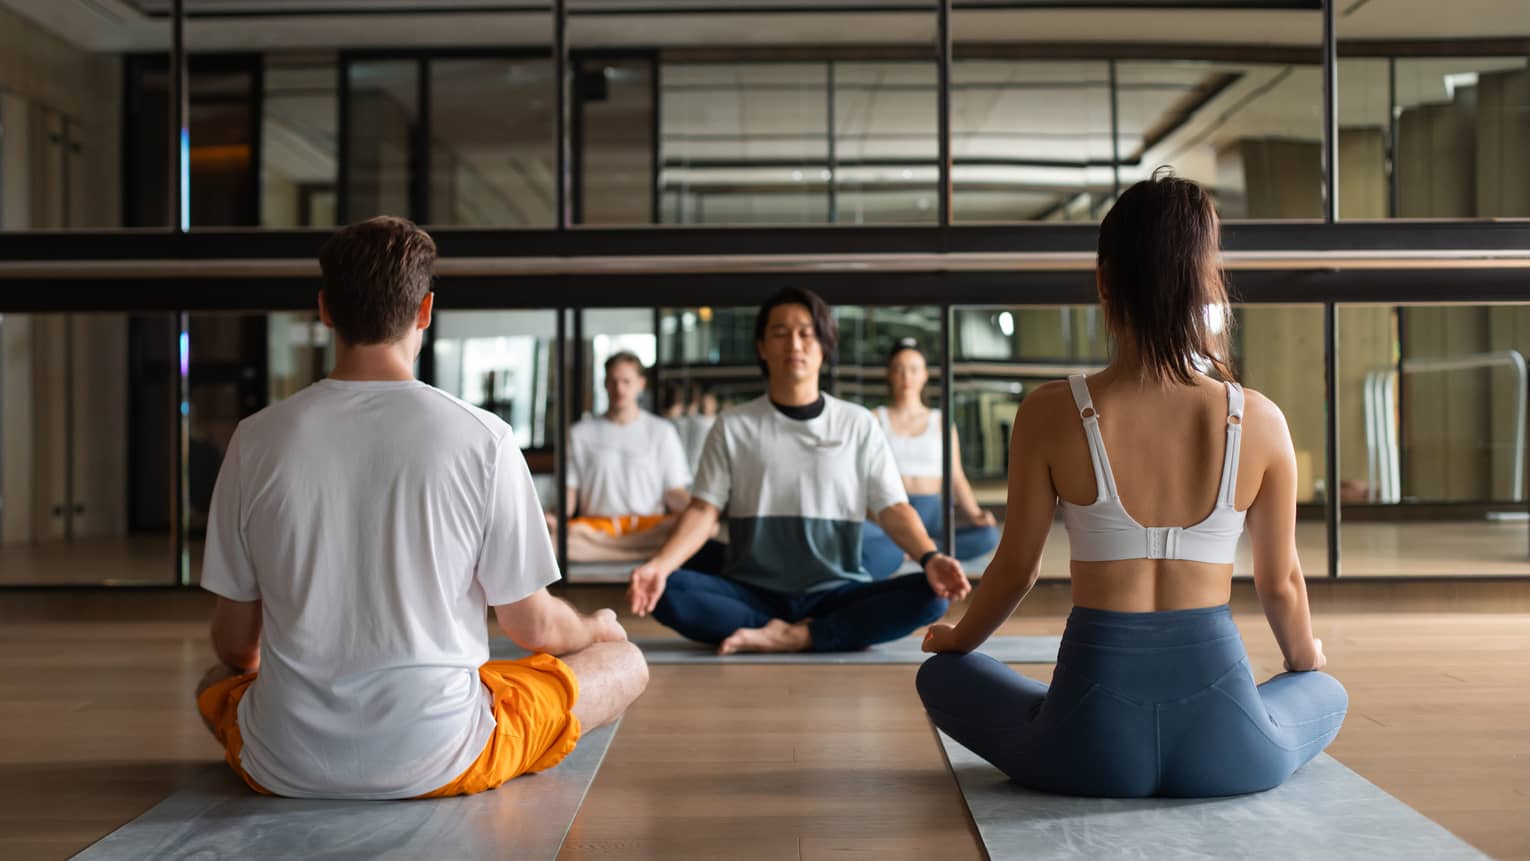 Instructor and two guests in meditation pose in yoga studio with wall of mirrors